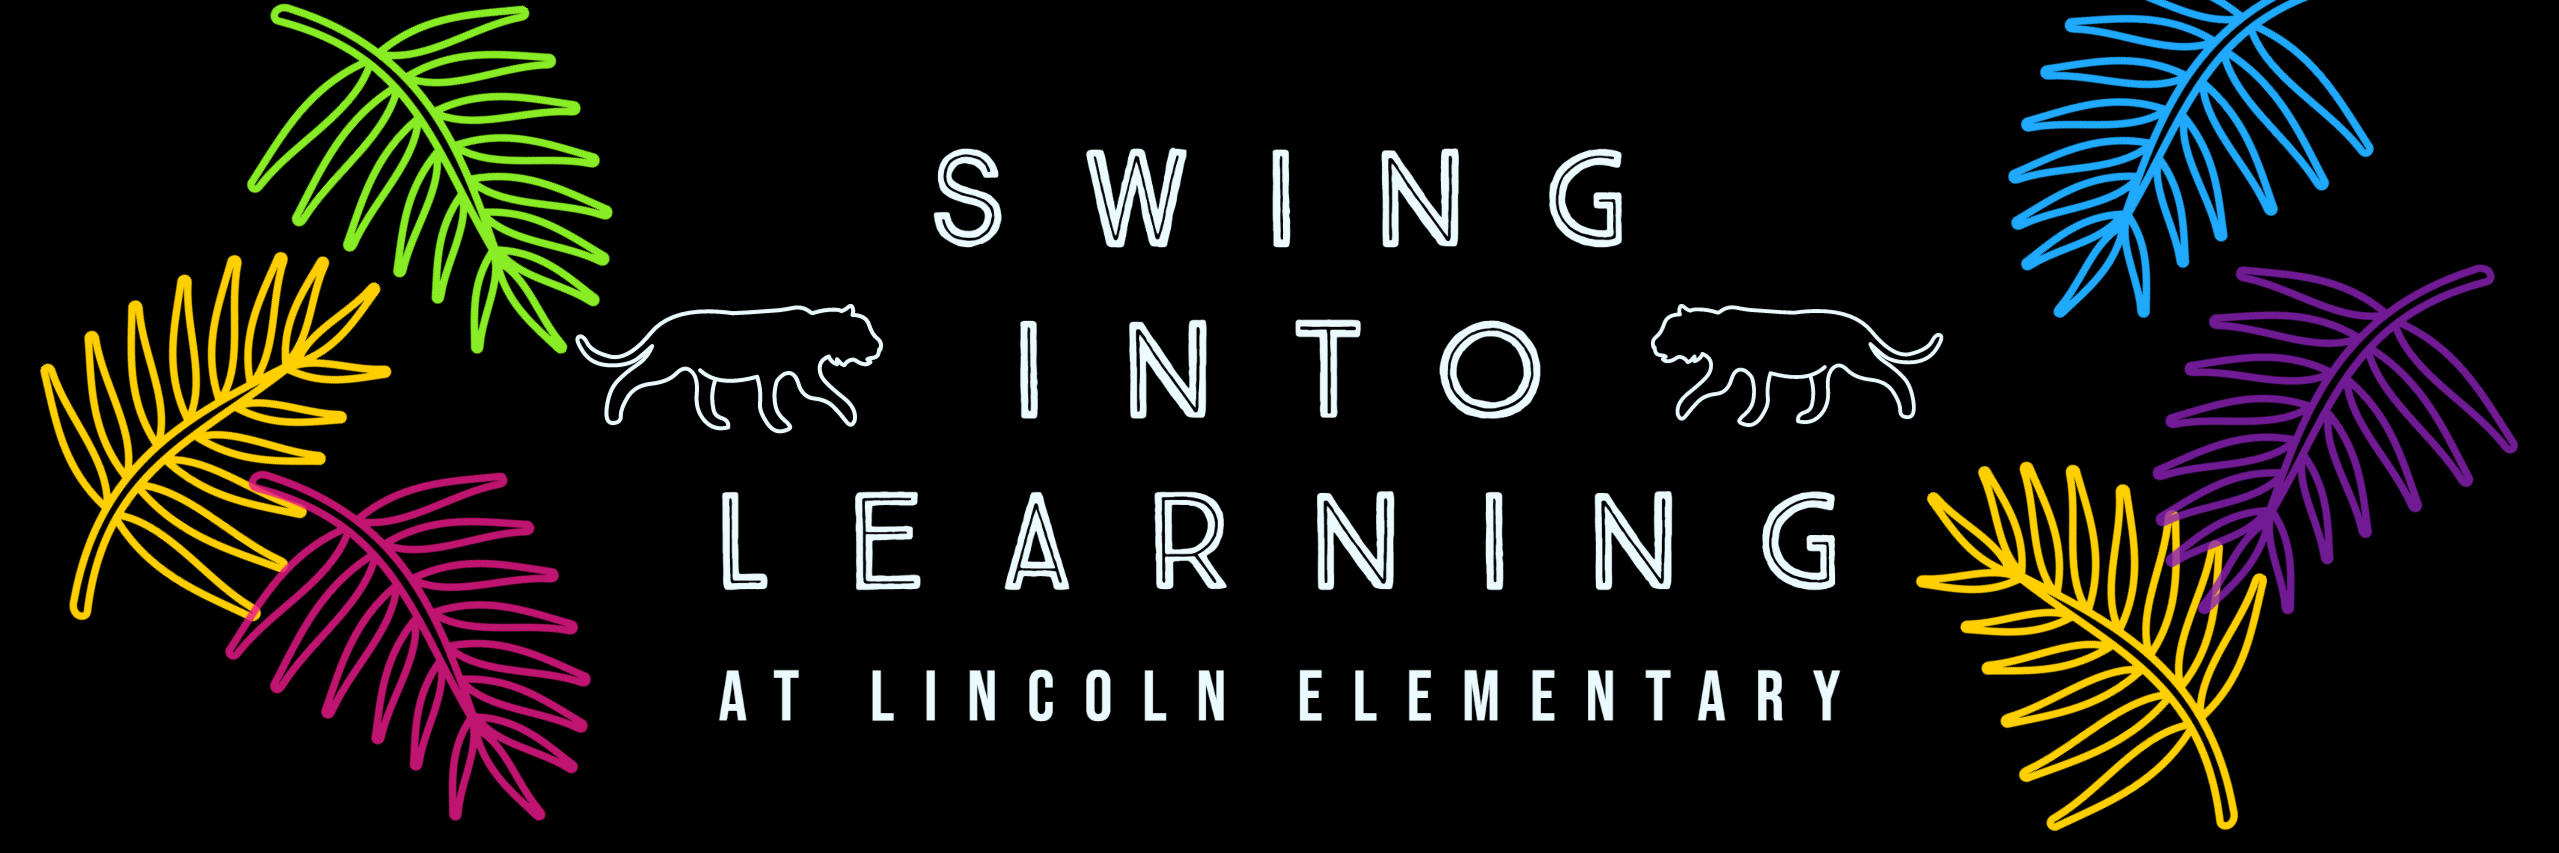 Swing Into Learning at Lincoln